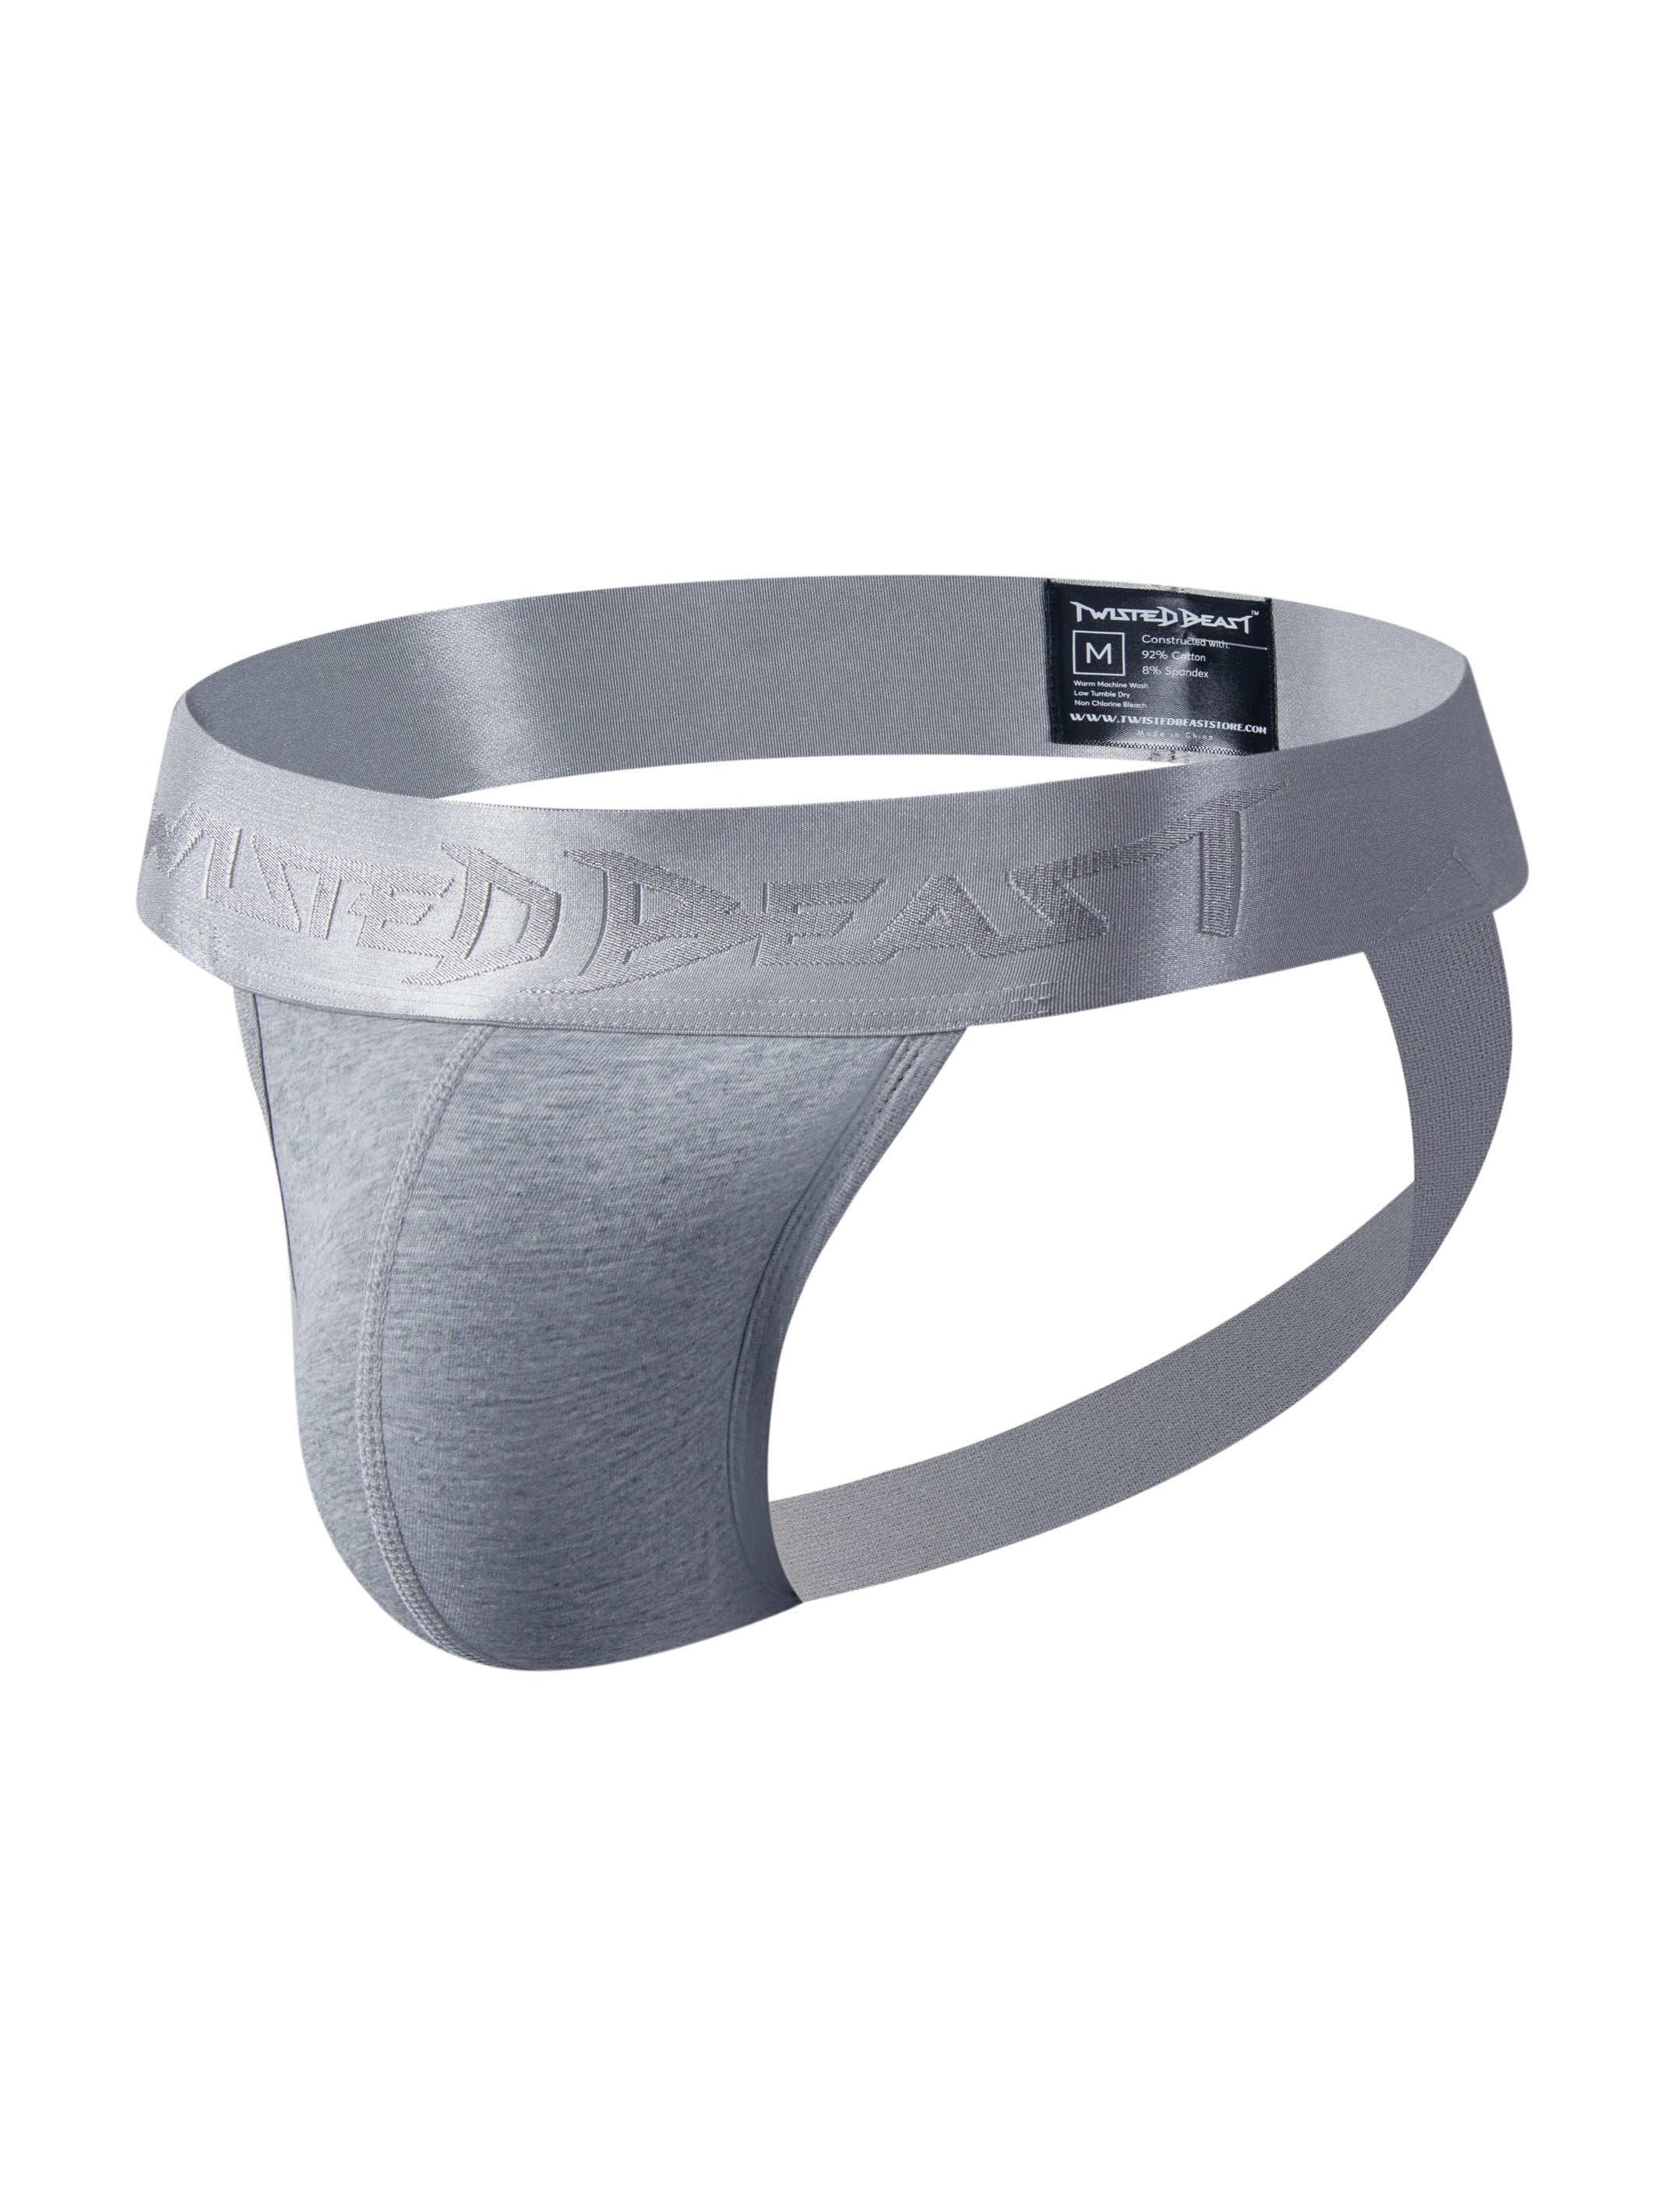 A product photo from the side of a grey Phantom Jock.